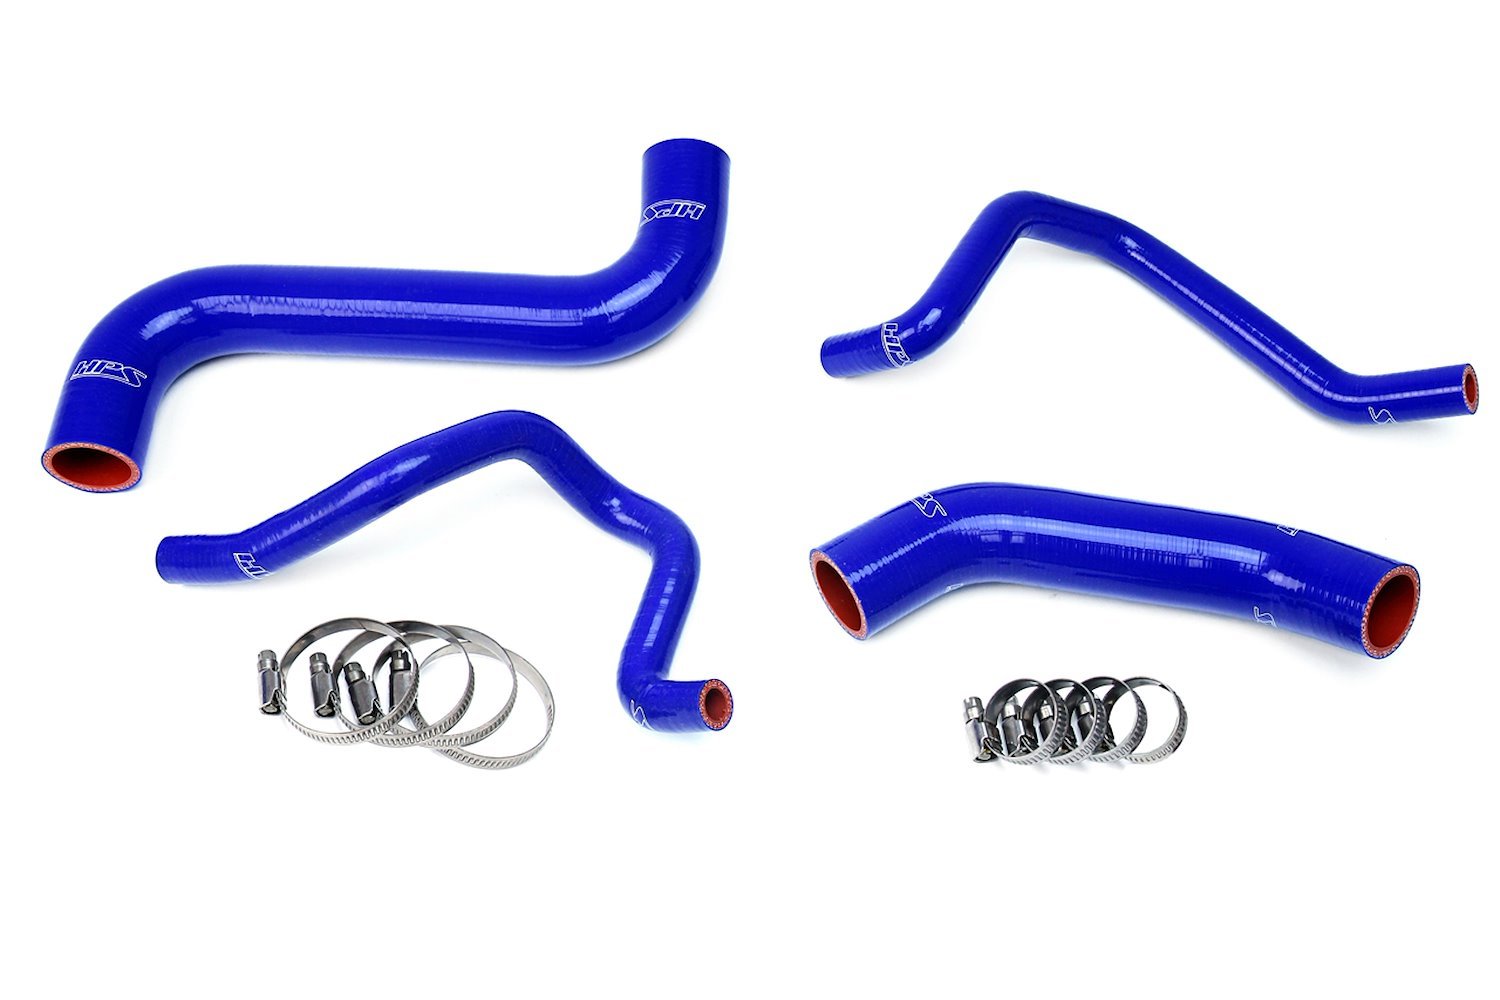 57-1733-BLUE Coolant Hose Kit, High-Temp 3-Ply Reinforced Silicone, Replace Rubber Radiator Heater Coolant Hoses